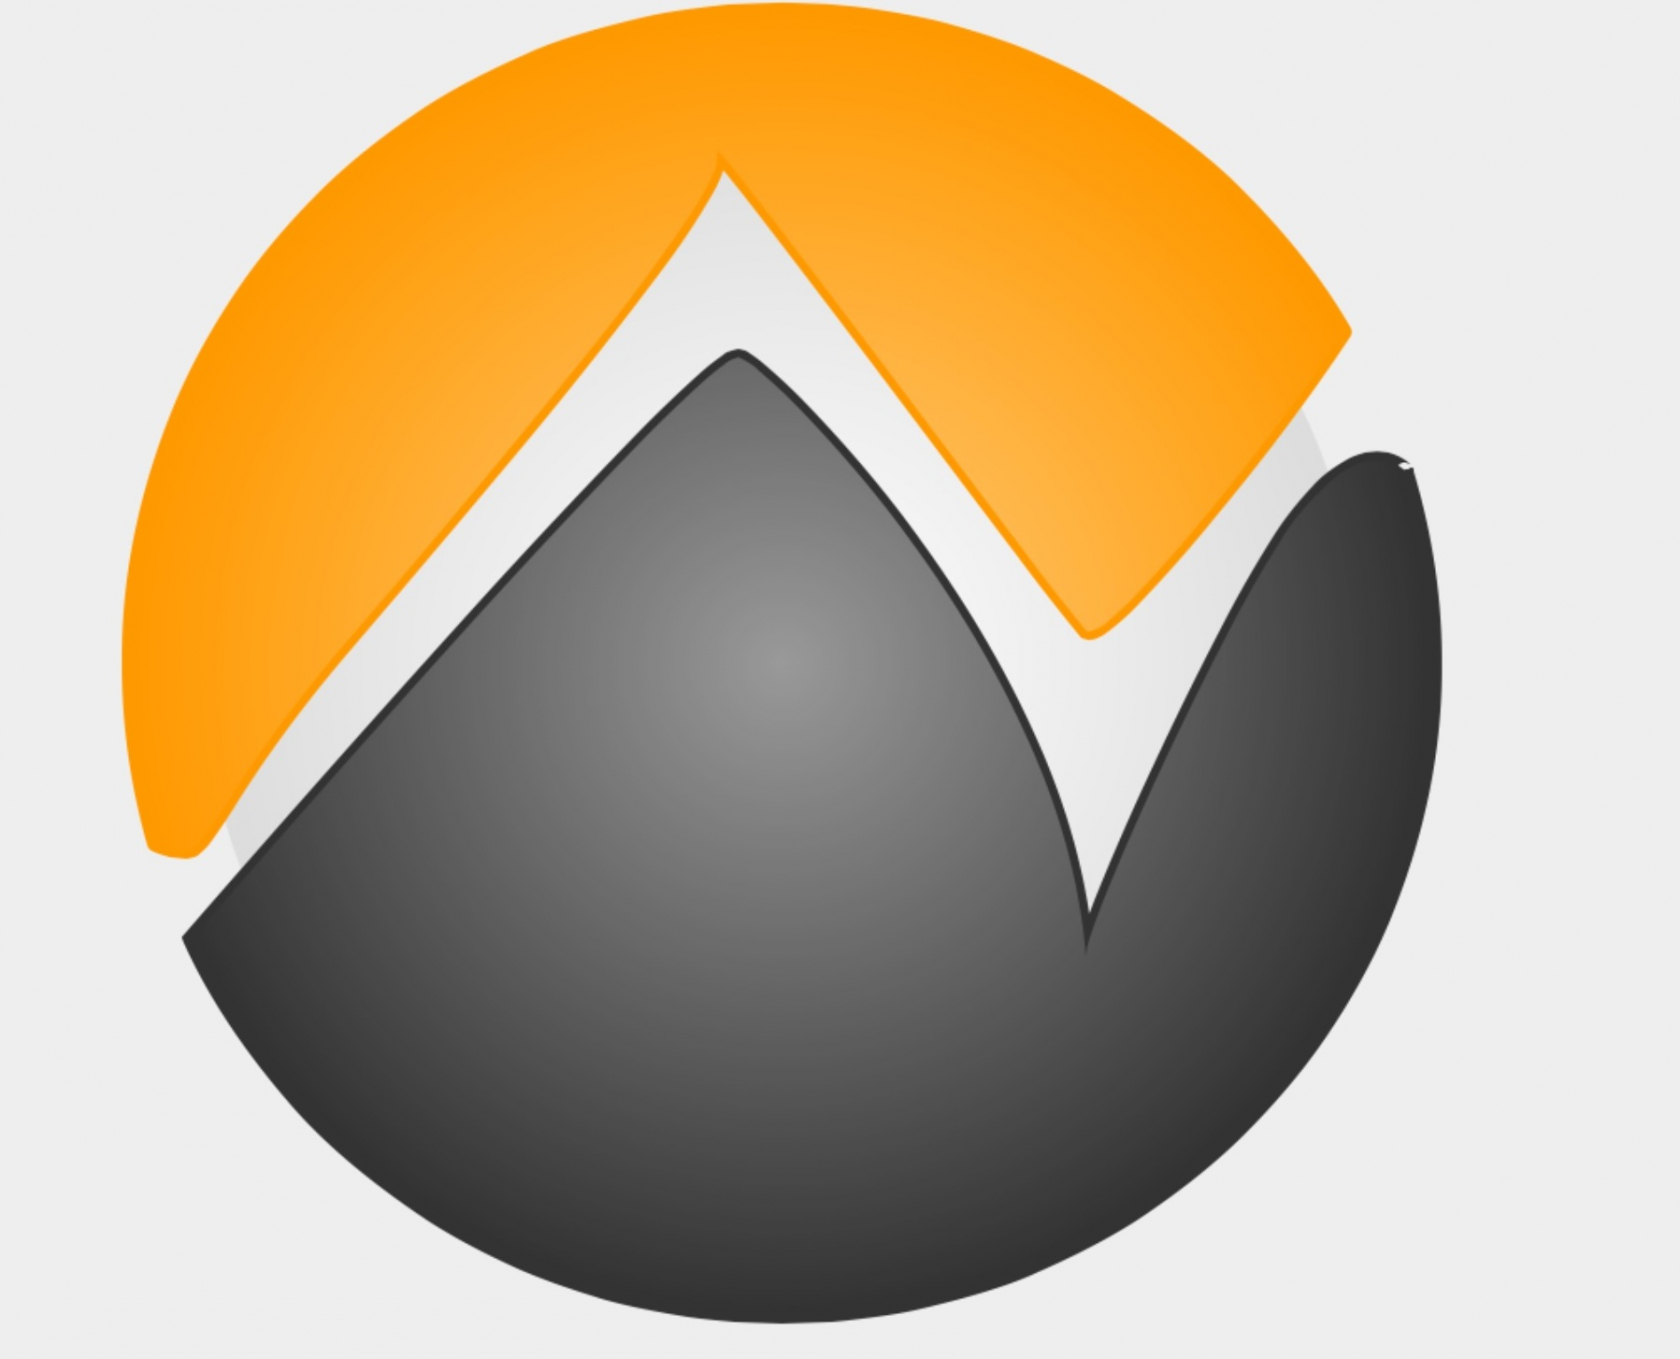 NeoGAF inaccessible following sexual harassment allegations against owner